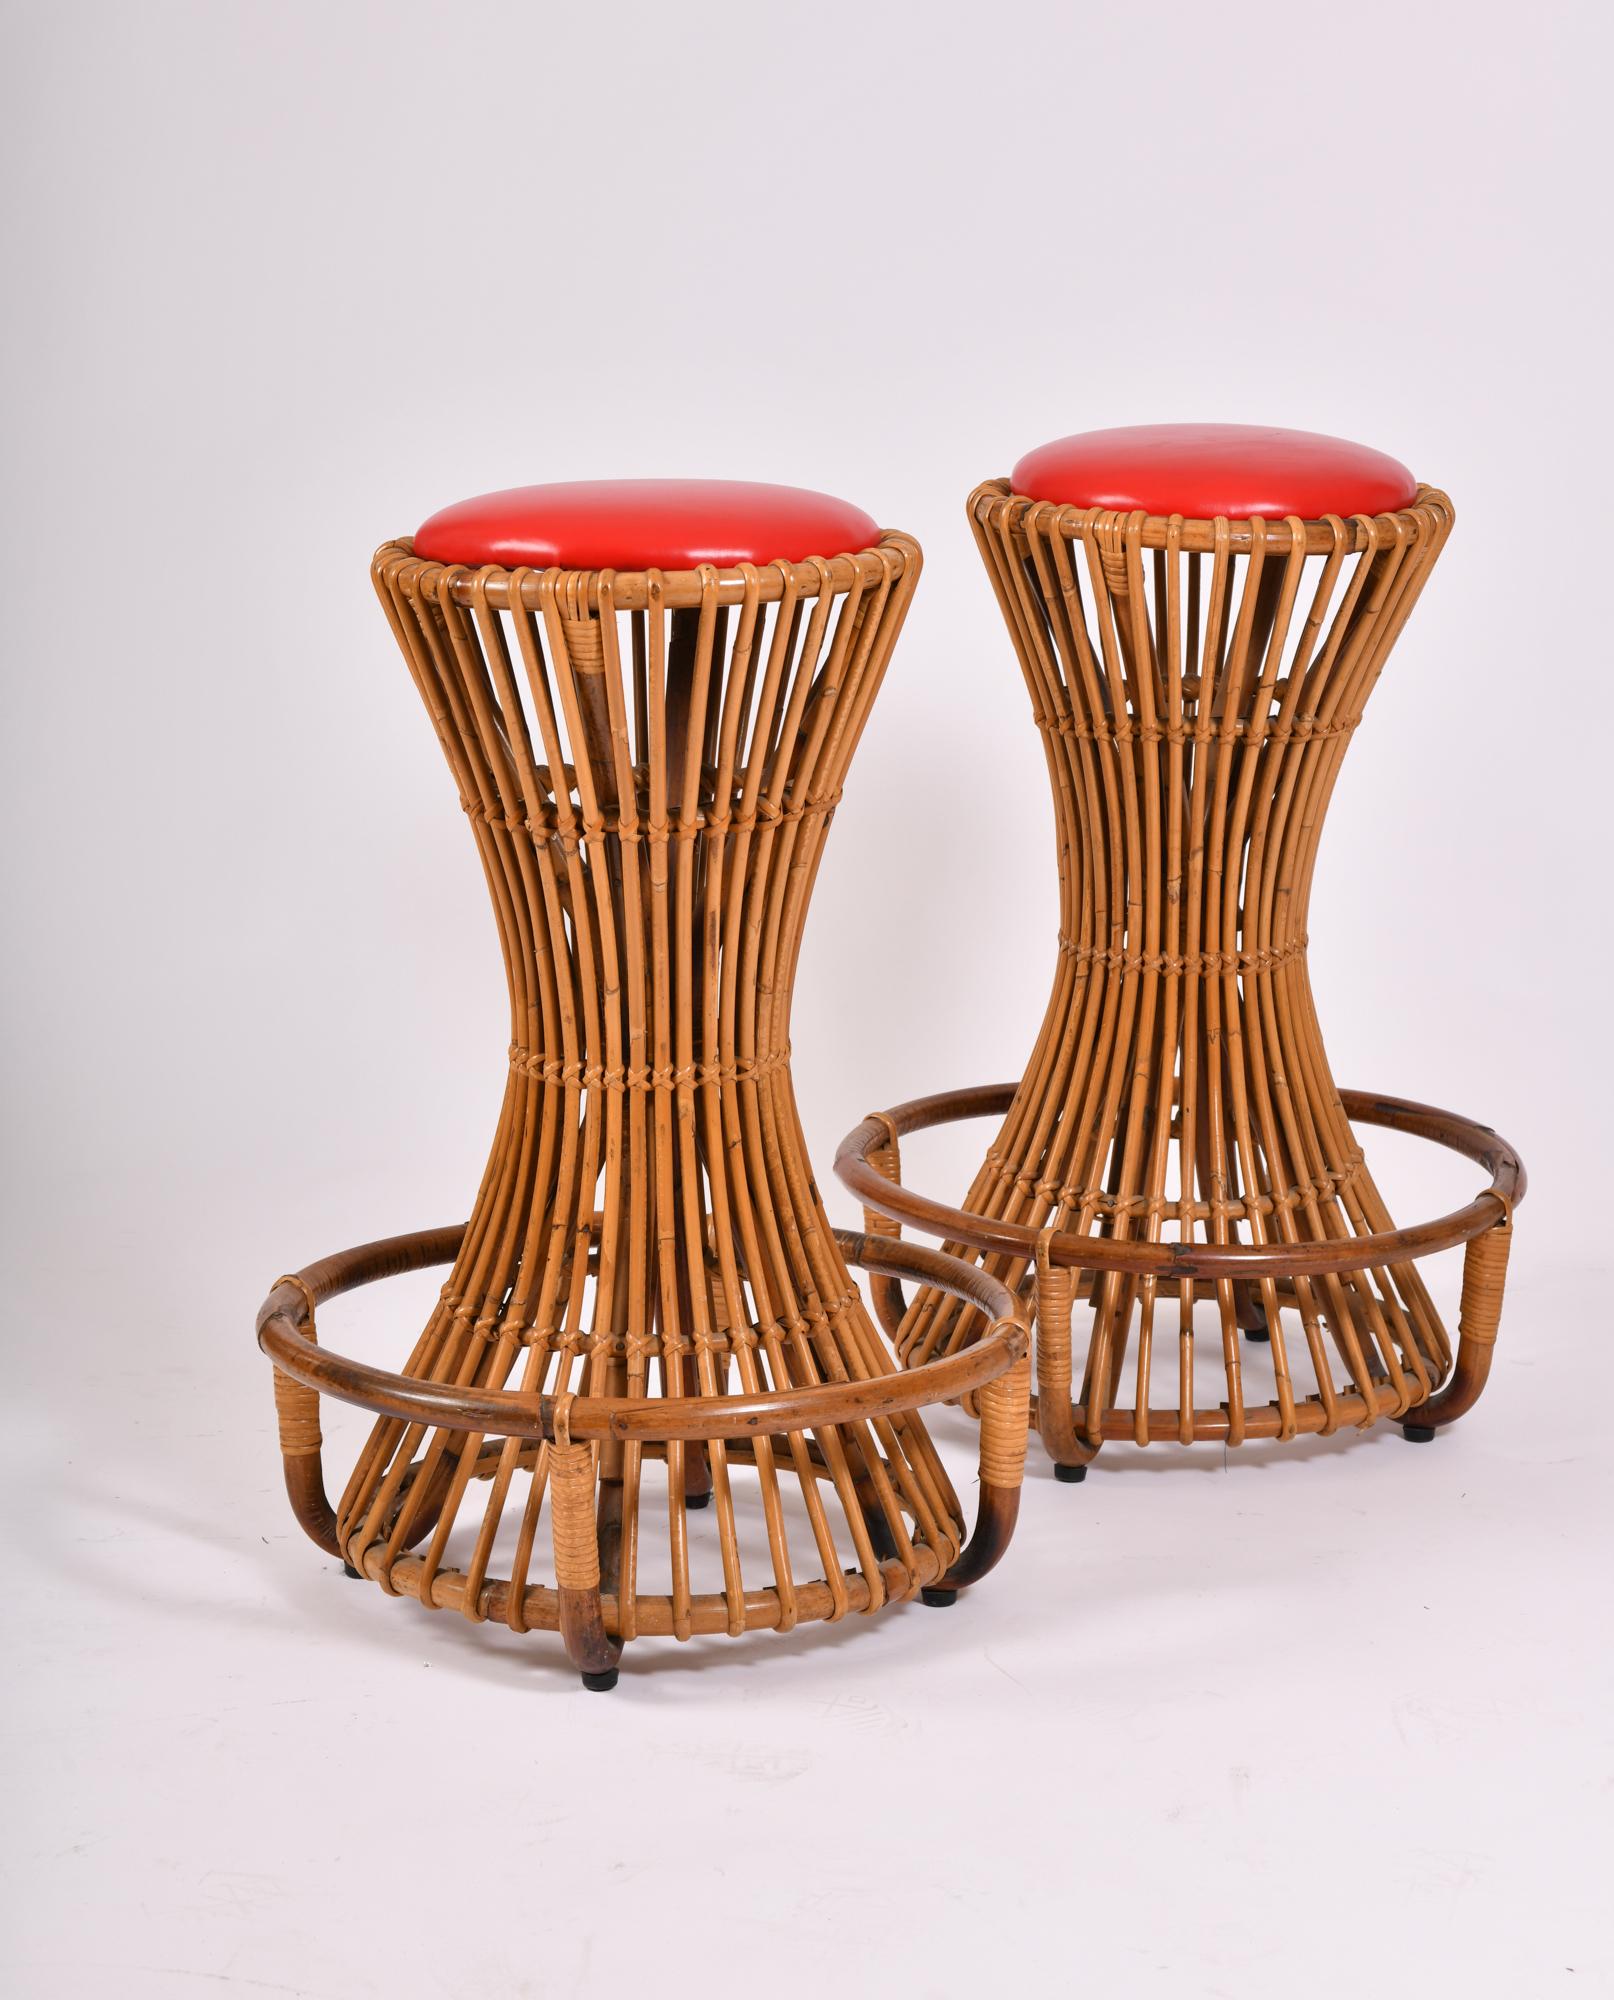 Wicker bamboo/rattan bar stools Italy, circa 1950.

** Now upholstered in a red mohair 4 way Knoll fabric... images coming soon!!
  